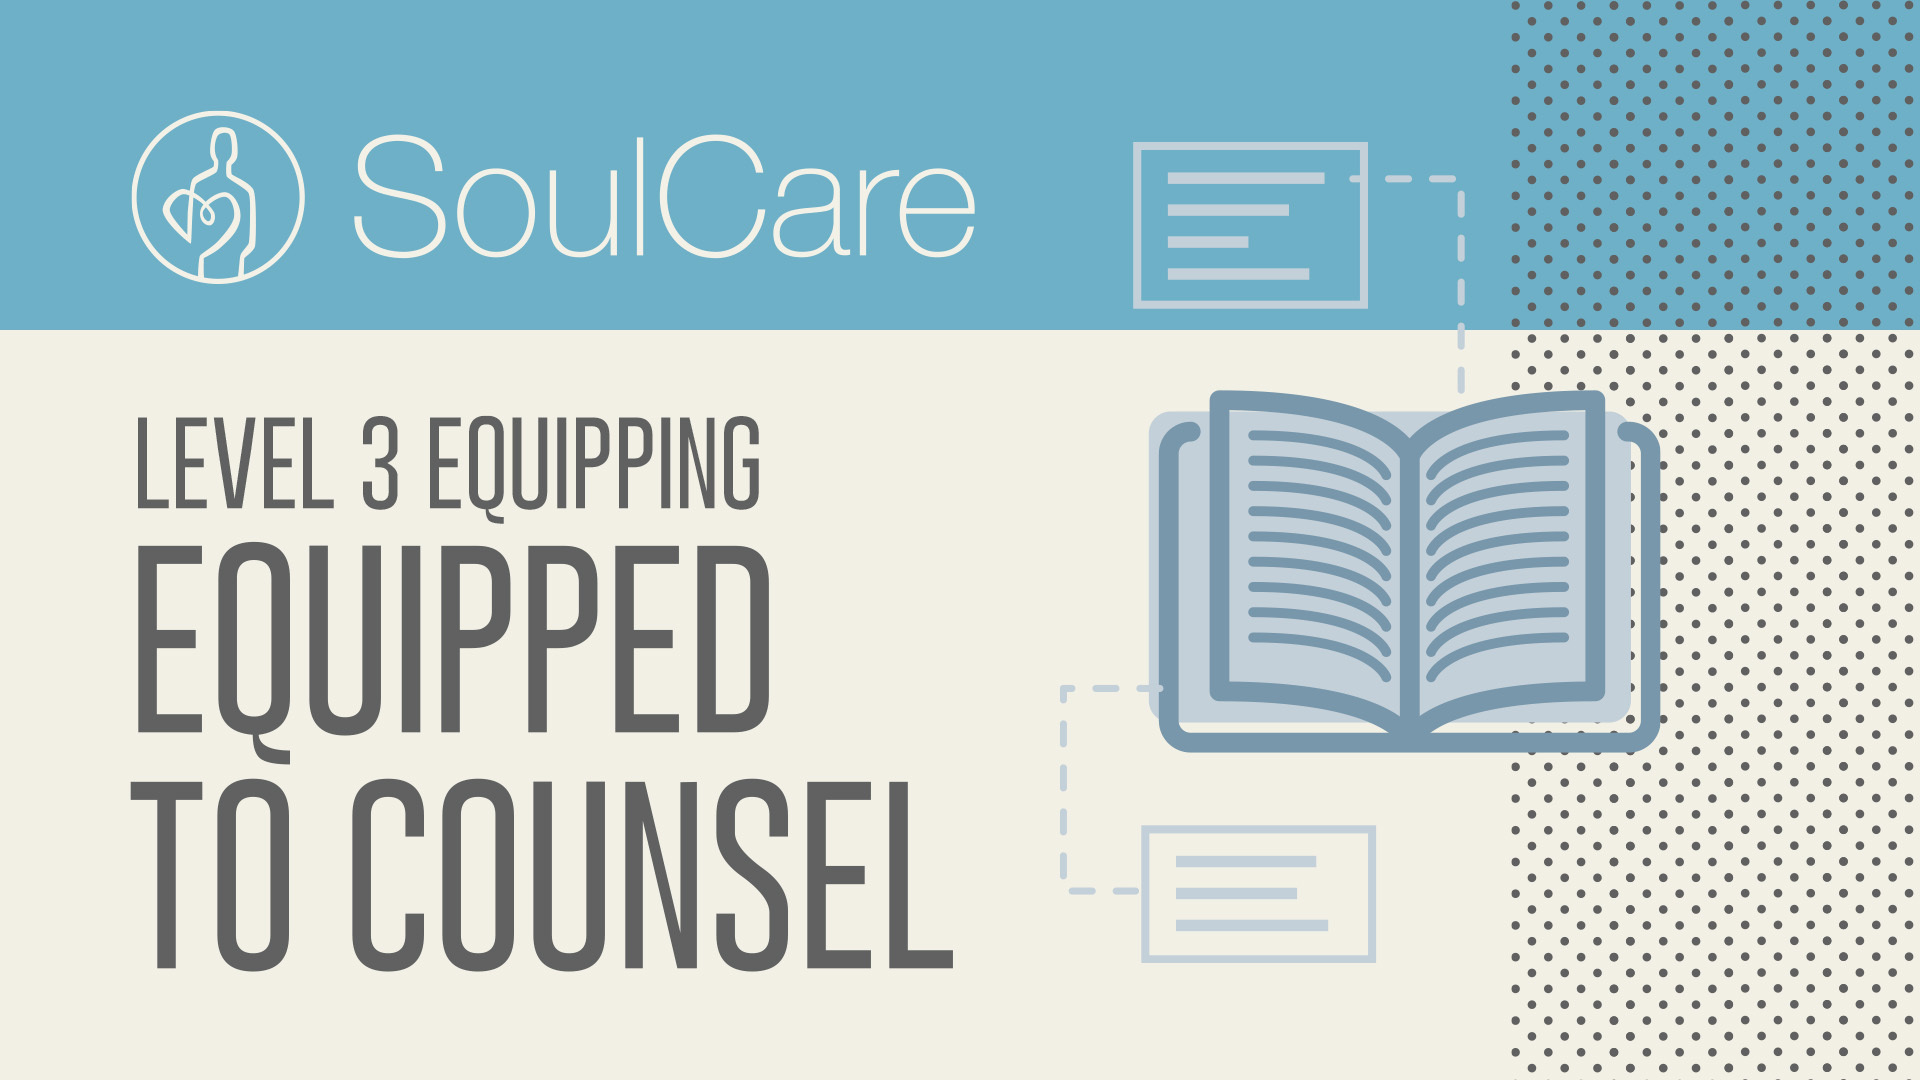 Equipped to Counsel